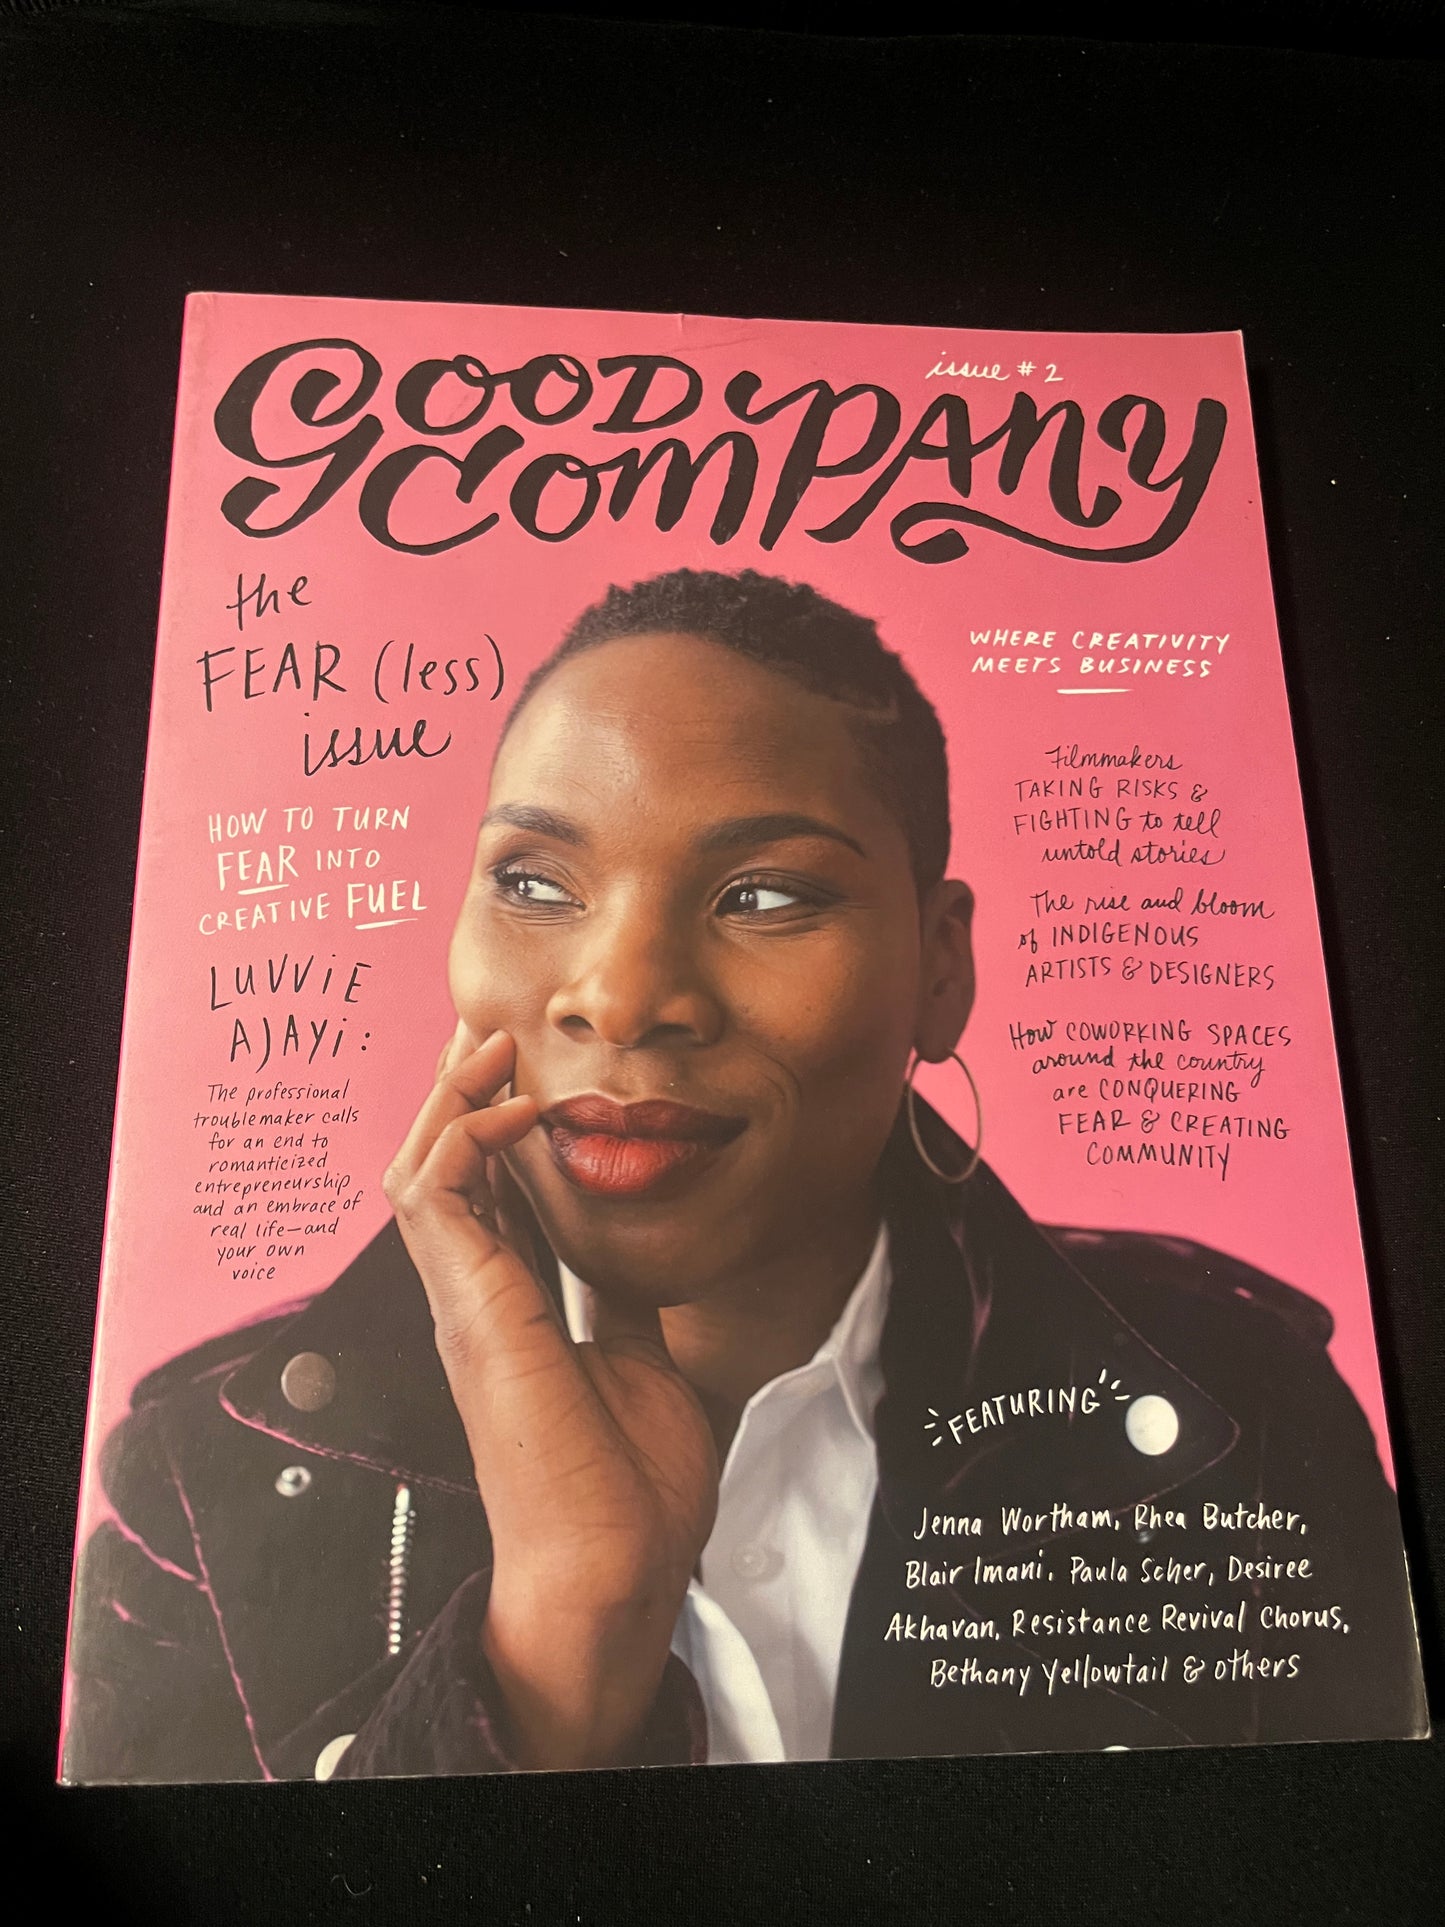 GOOD COMPANY THE FEAR(LESS) Issue by Grace Bonney